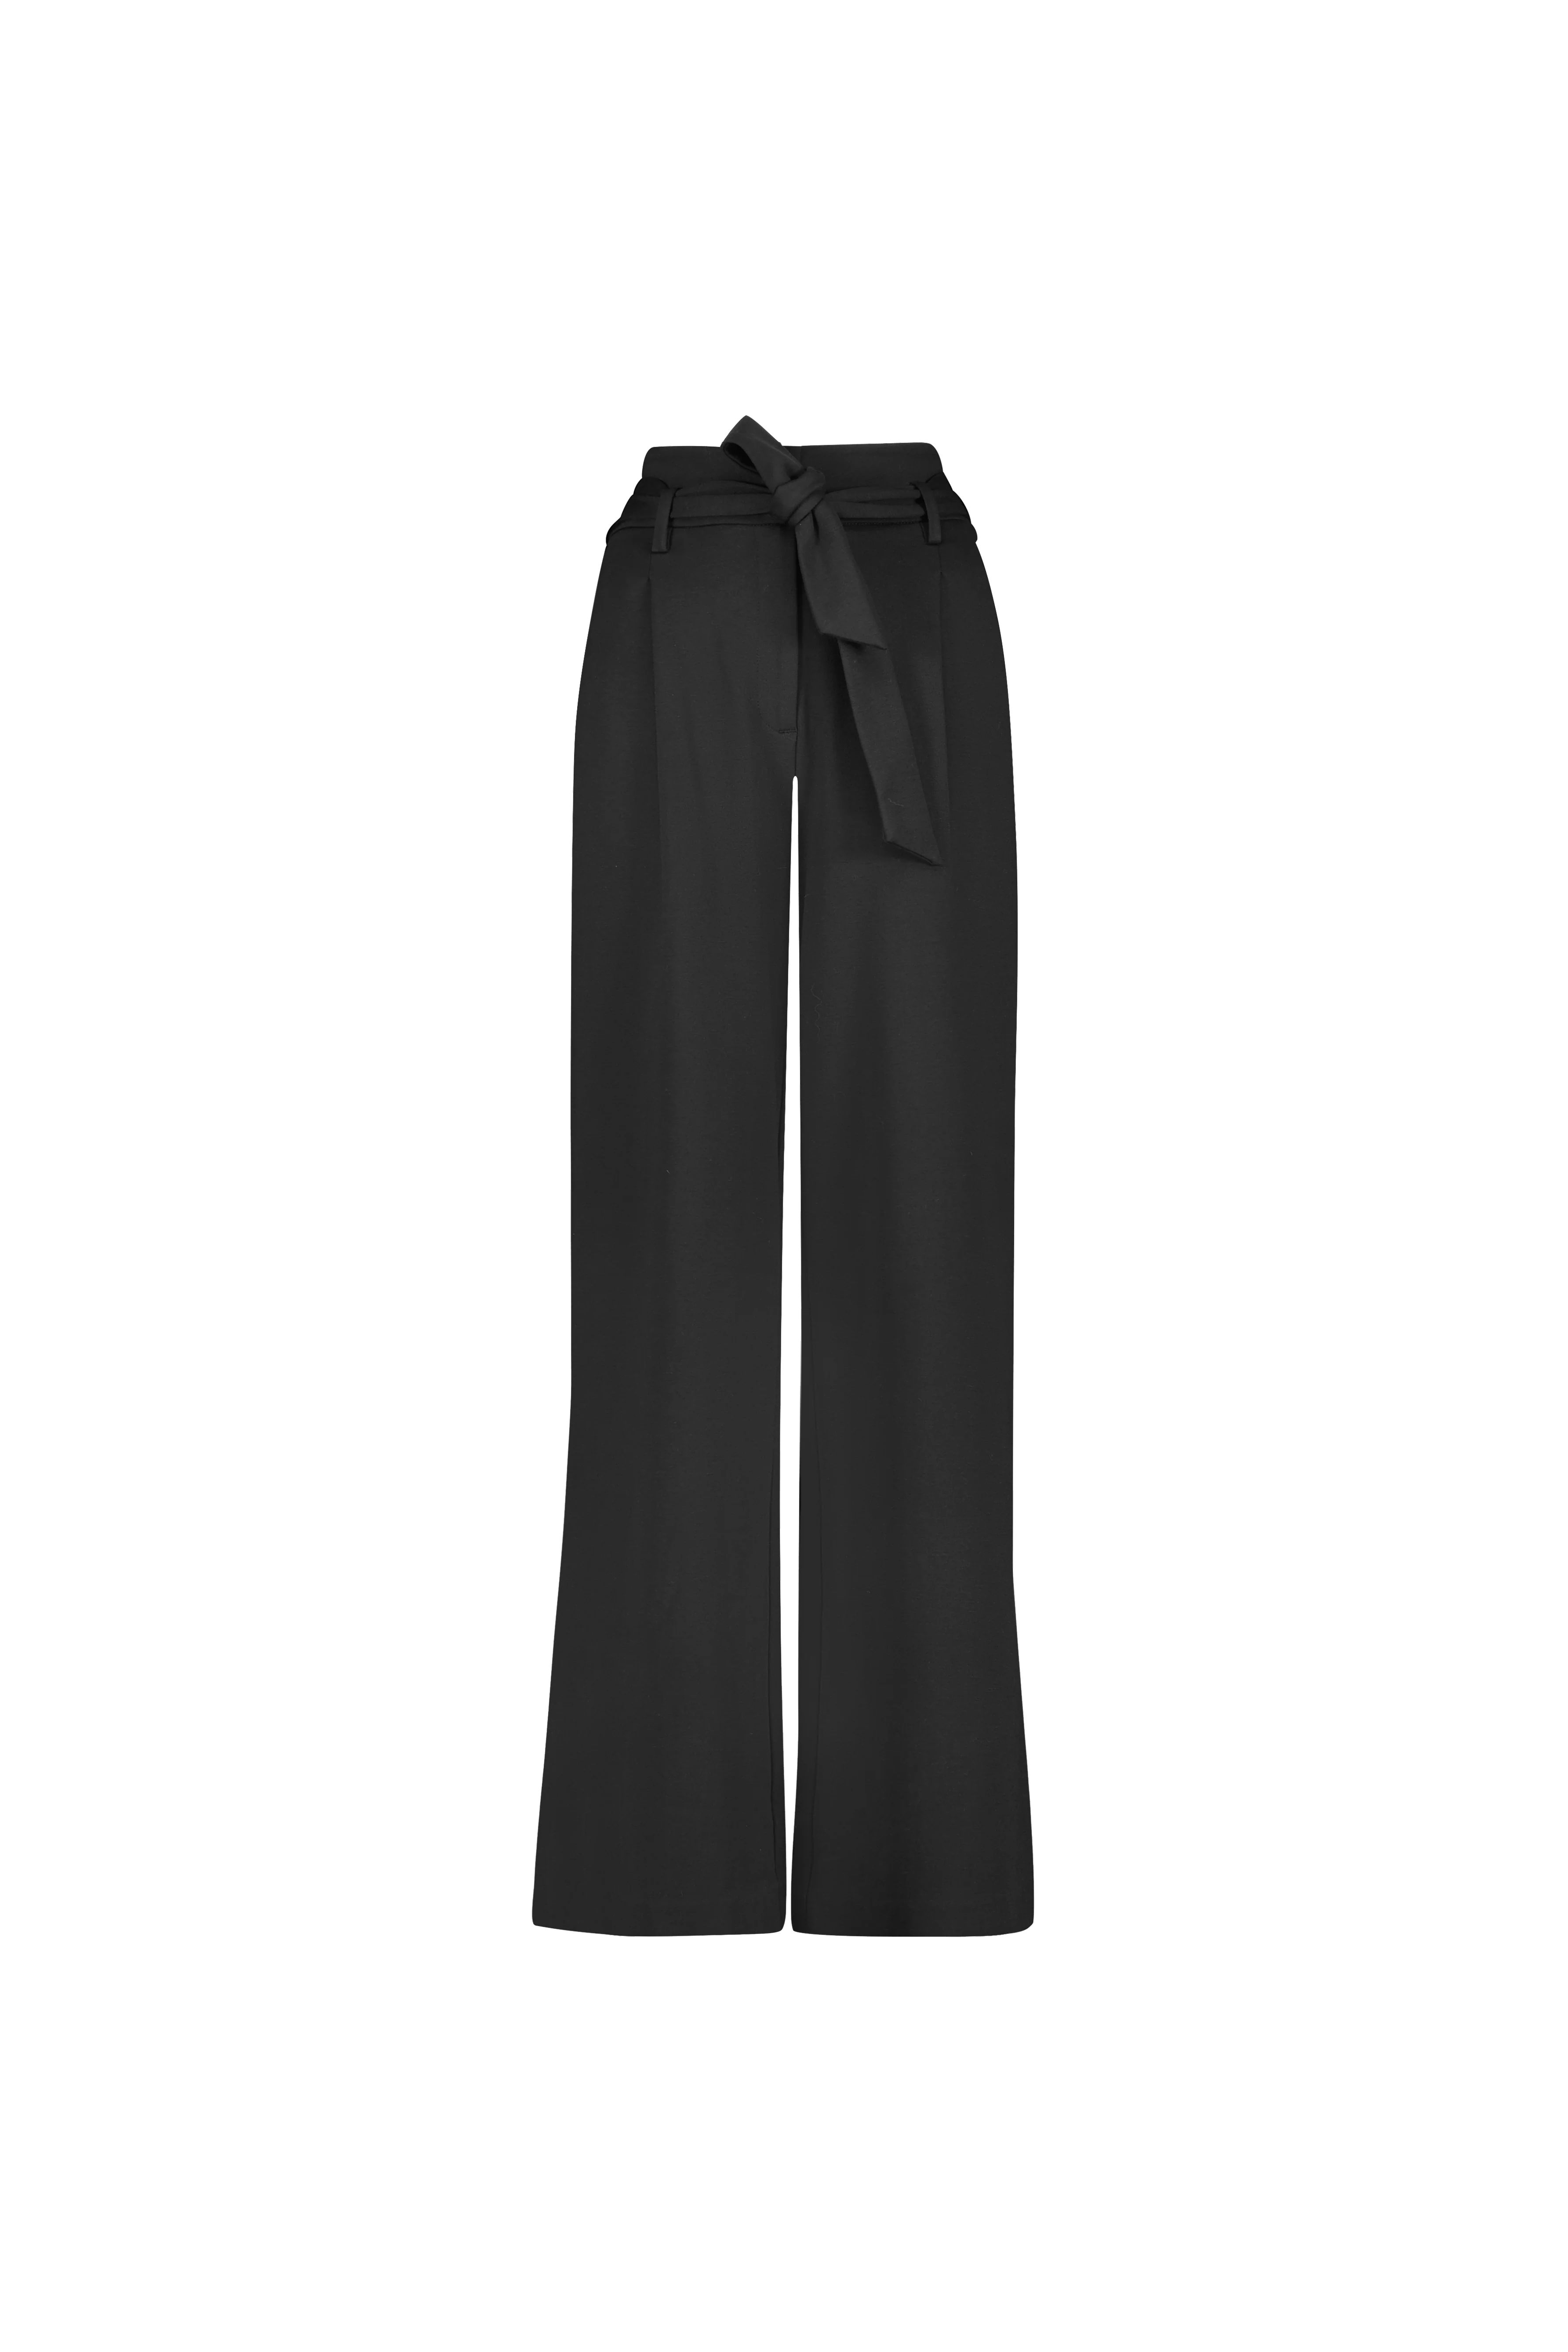 Relaxed Tie-Waist Pants | MAYSON the label